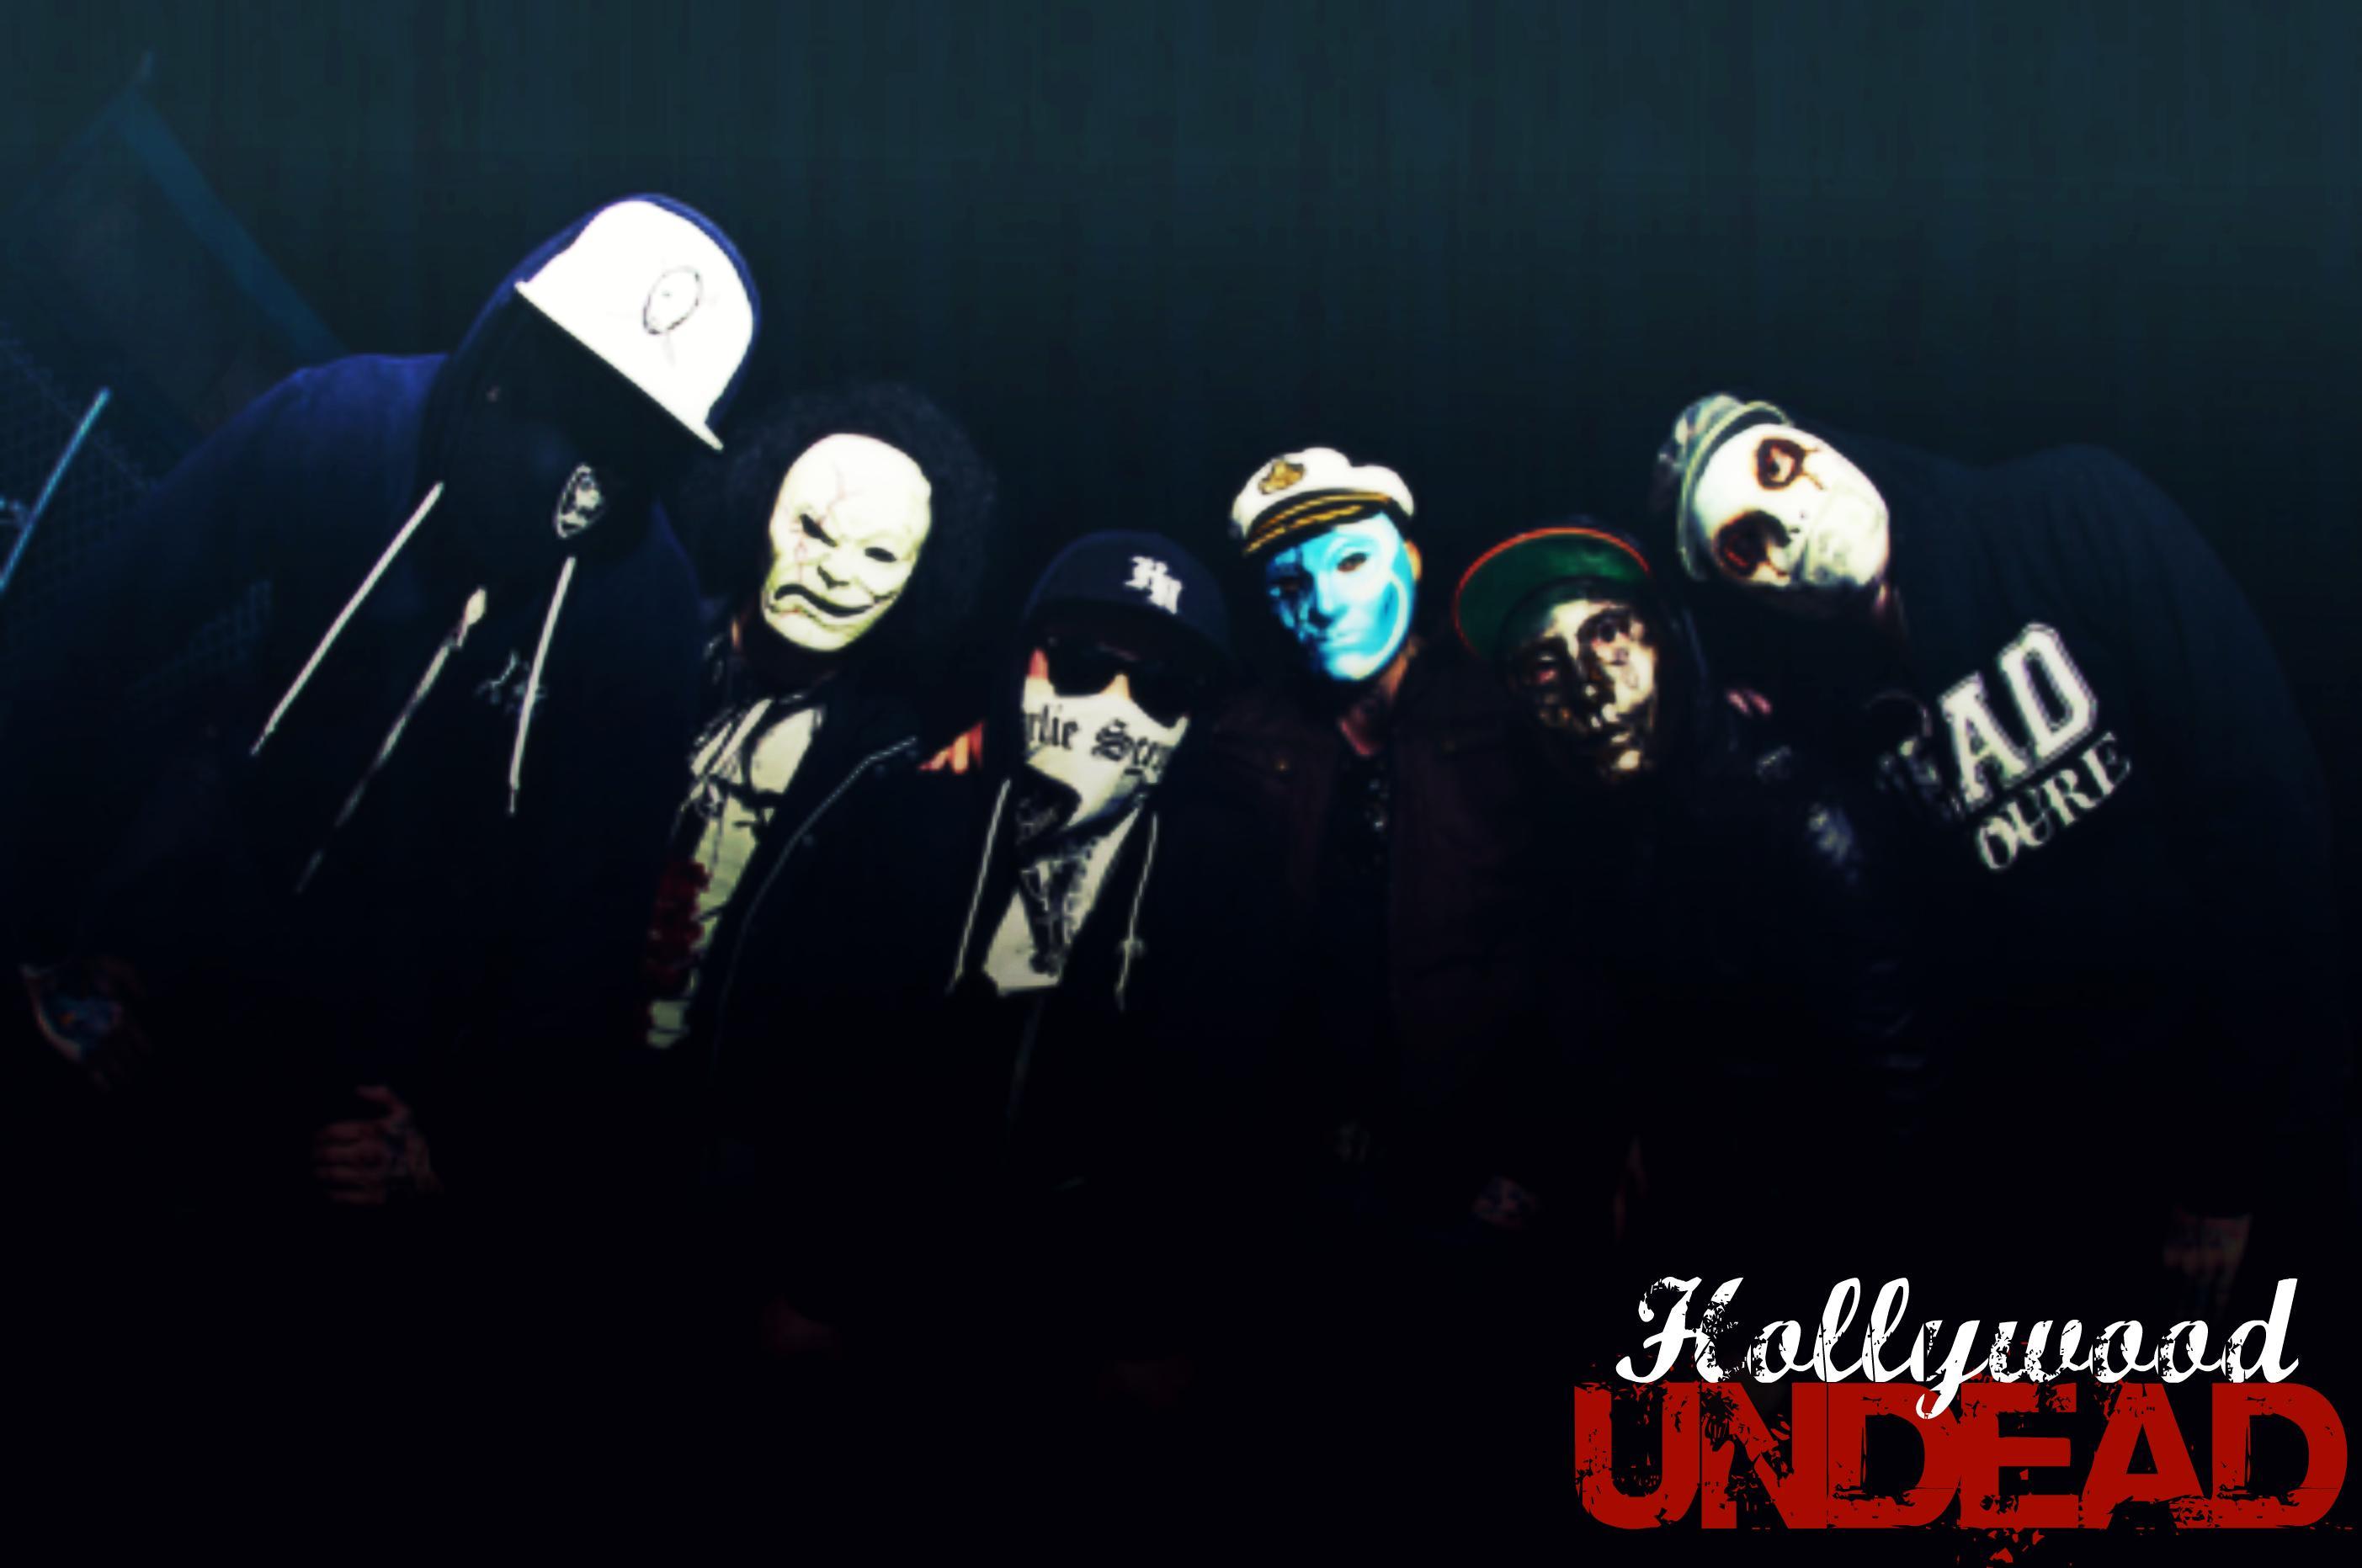 Wallpaper.wiki Hollywood Undead Wallpaper HD PIC WPE007359